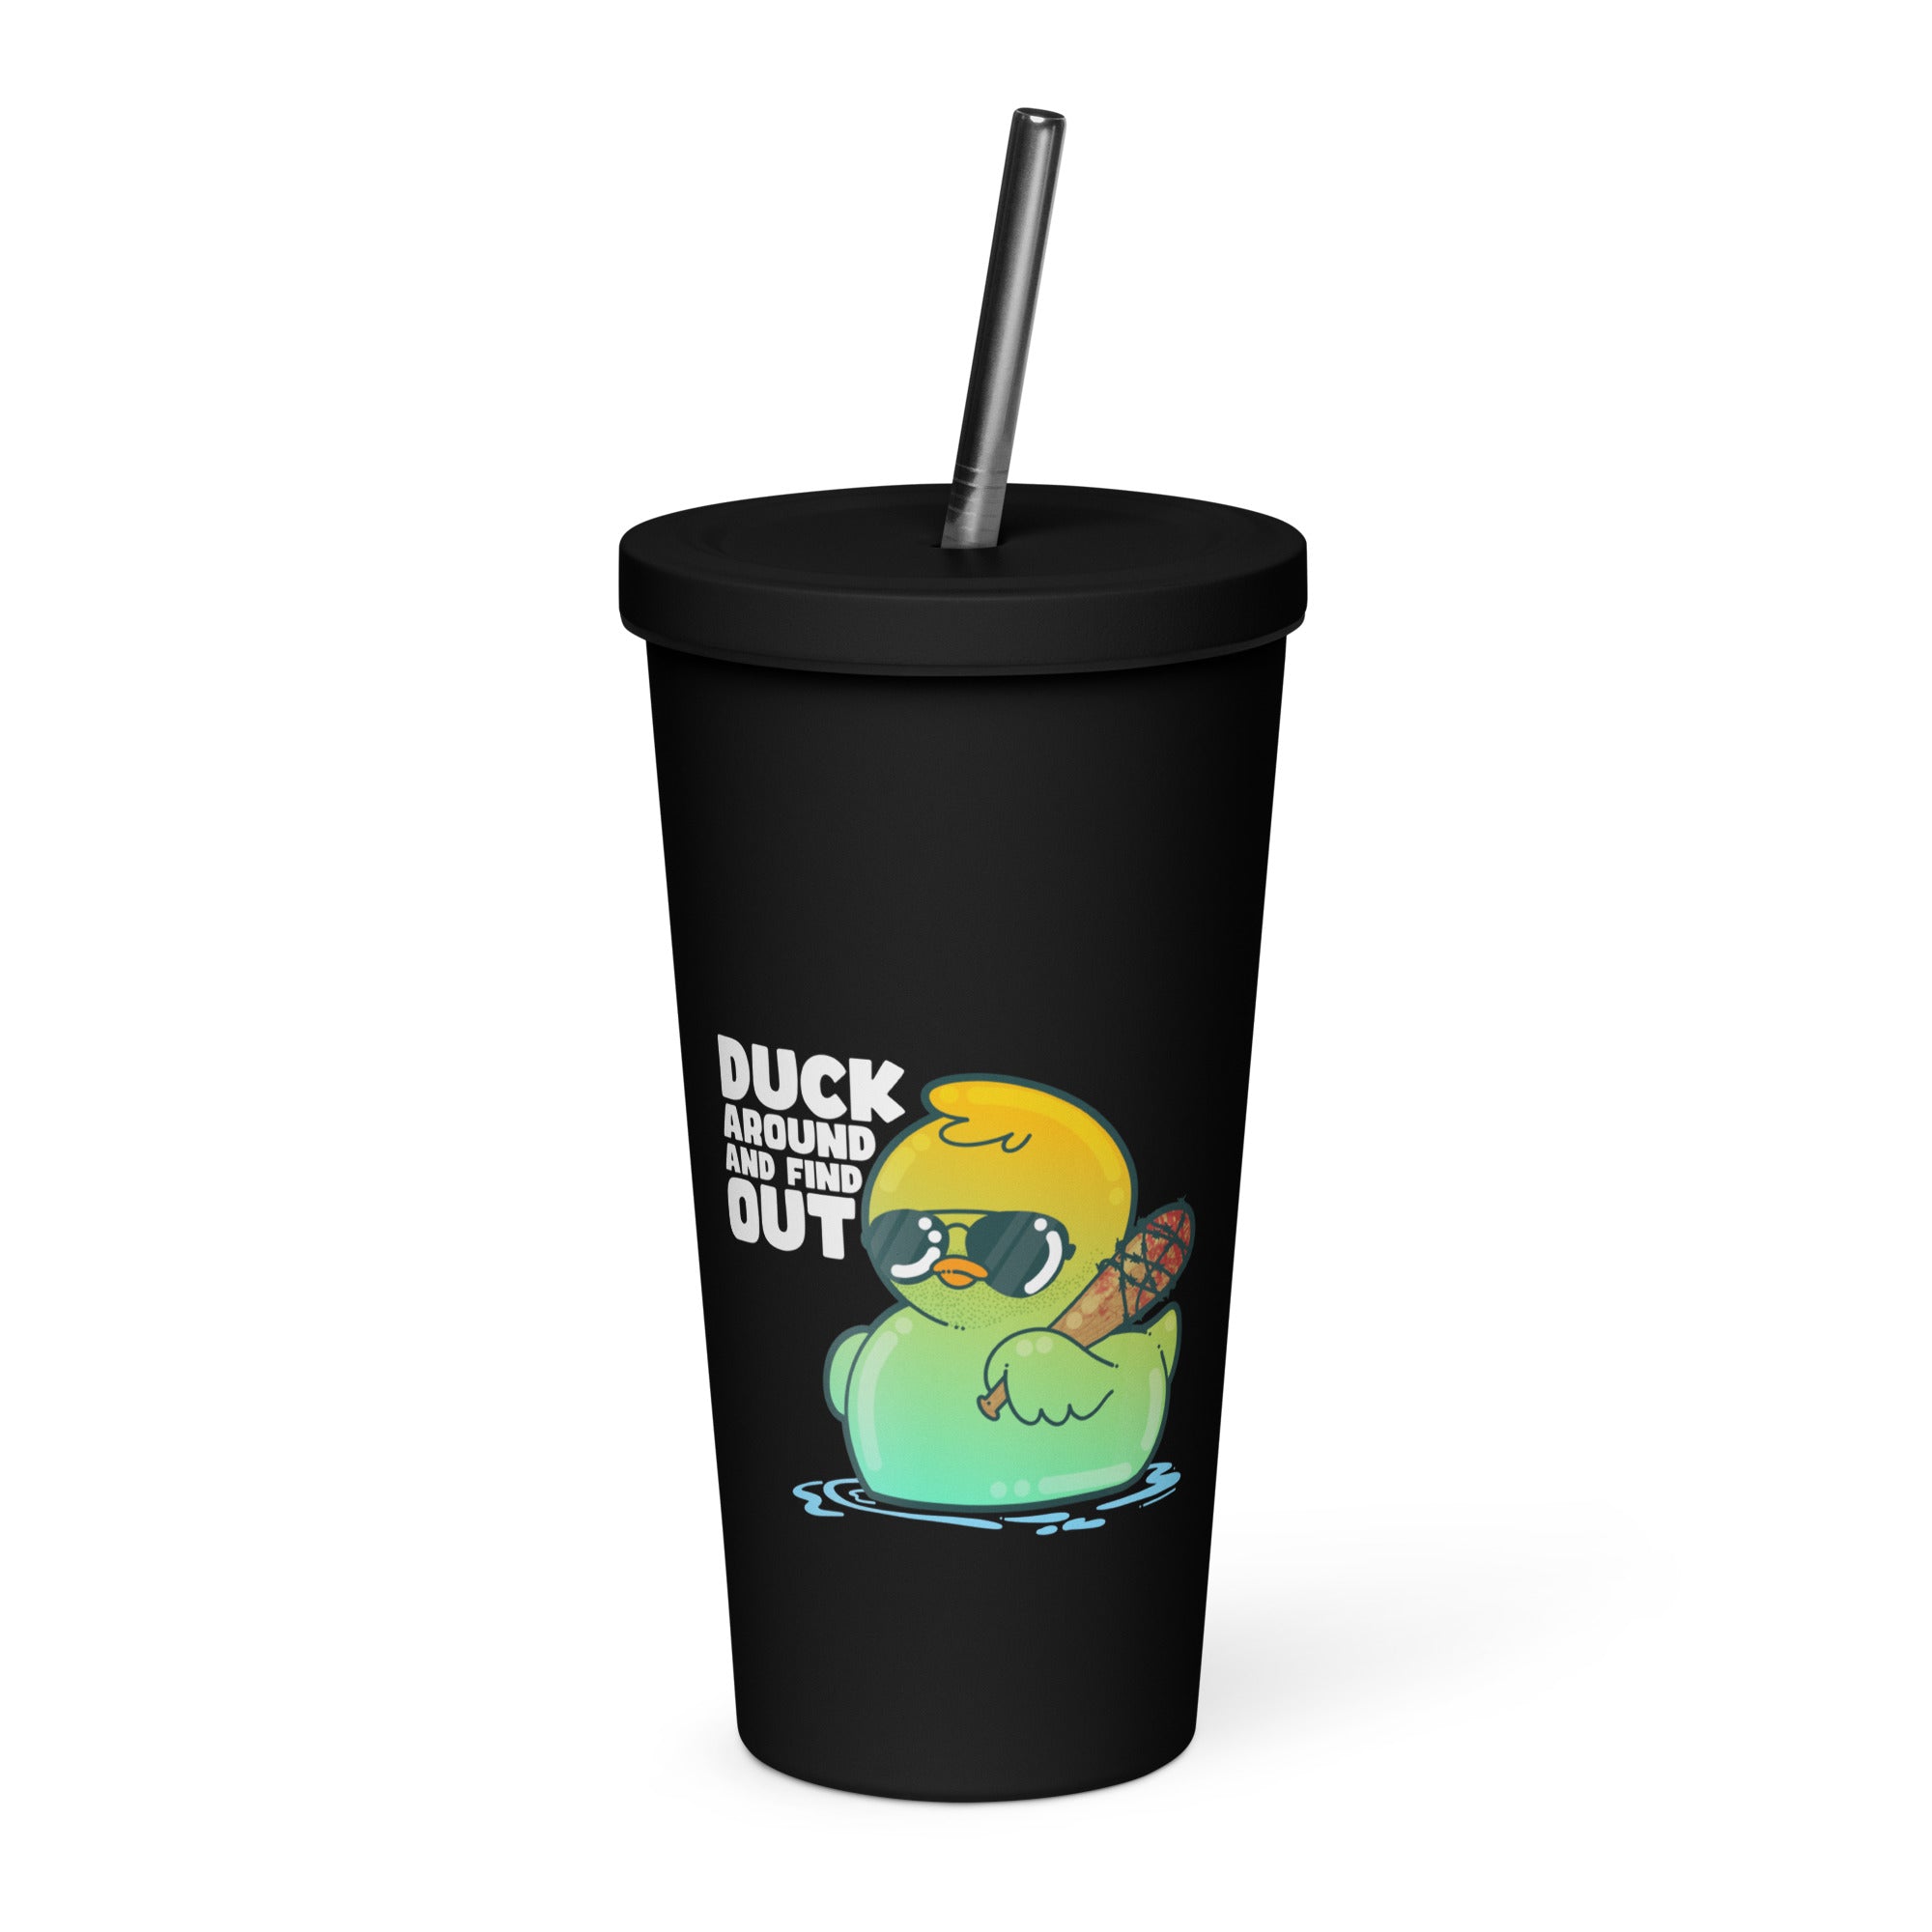 DUCK AROUND AND FIND OUT - Insulated Tumbler - ChubbleGumLLC